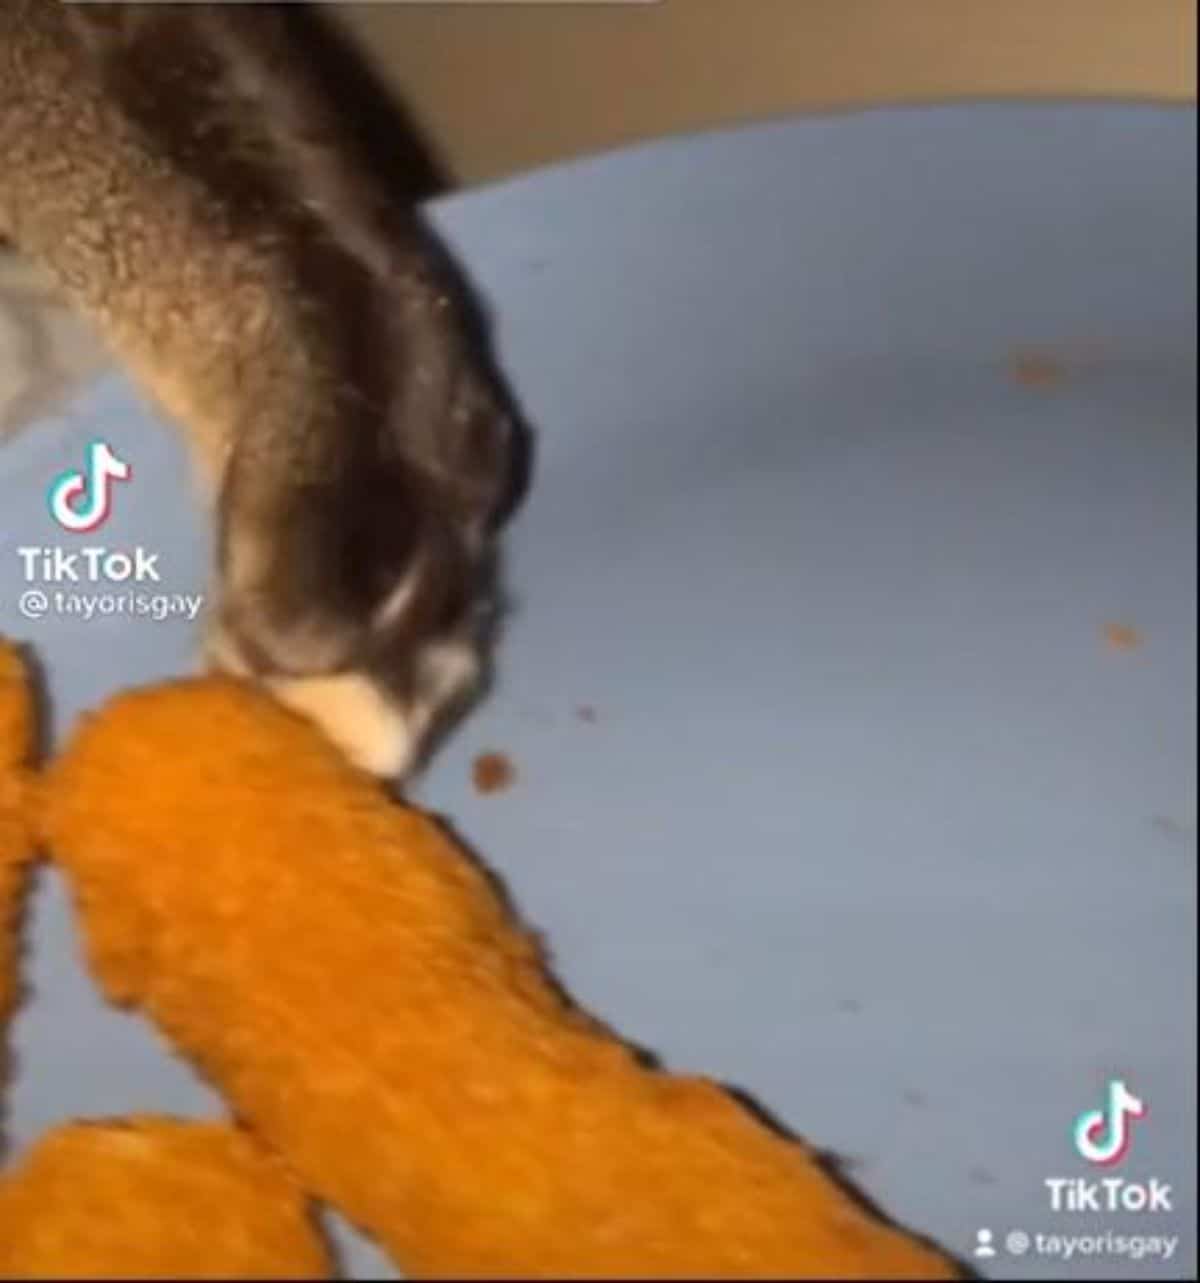 tabby cat's foot touching chicken on a blue plate